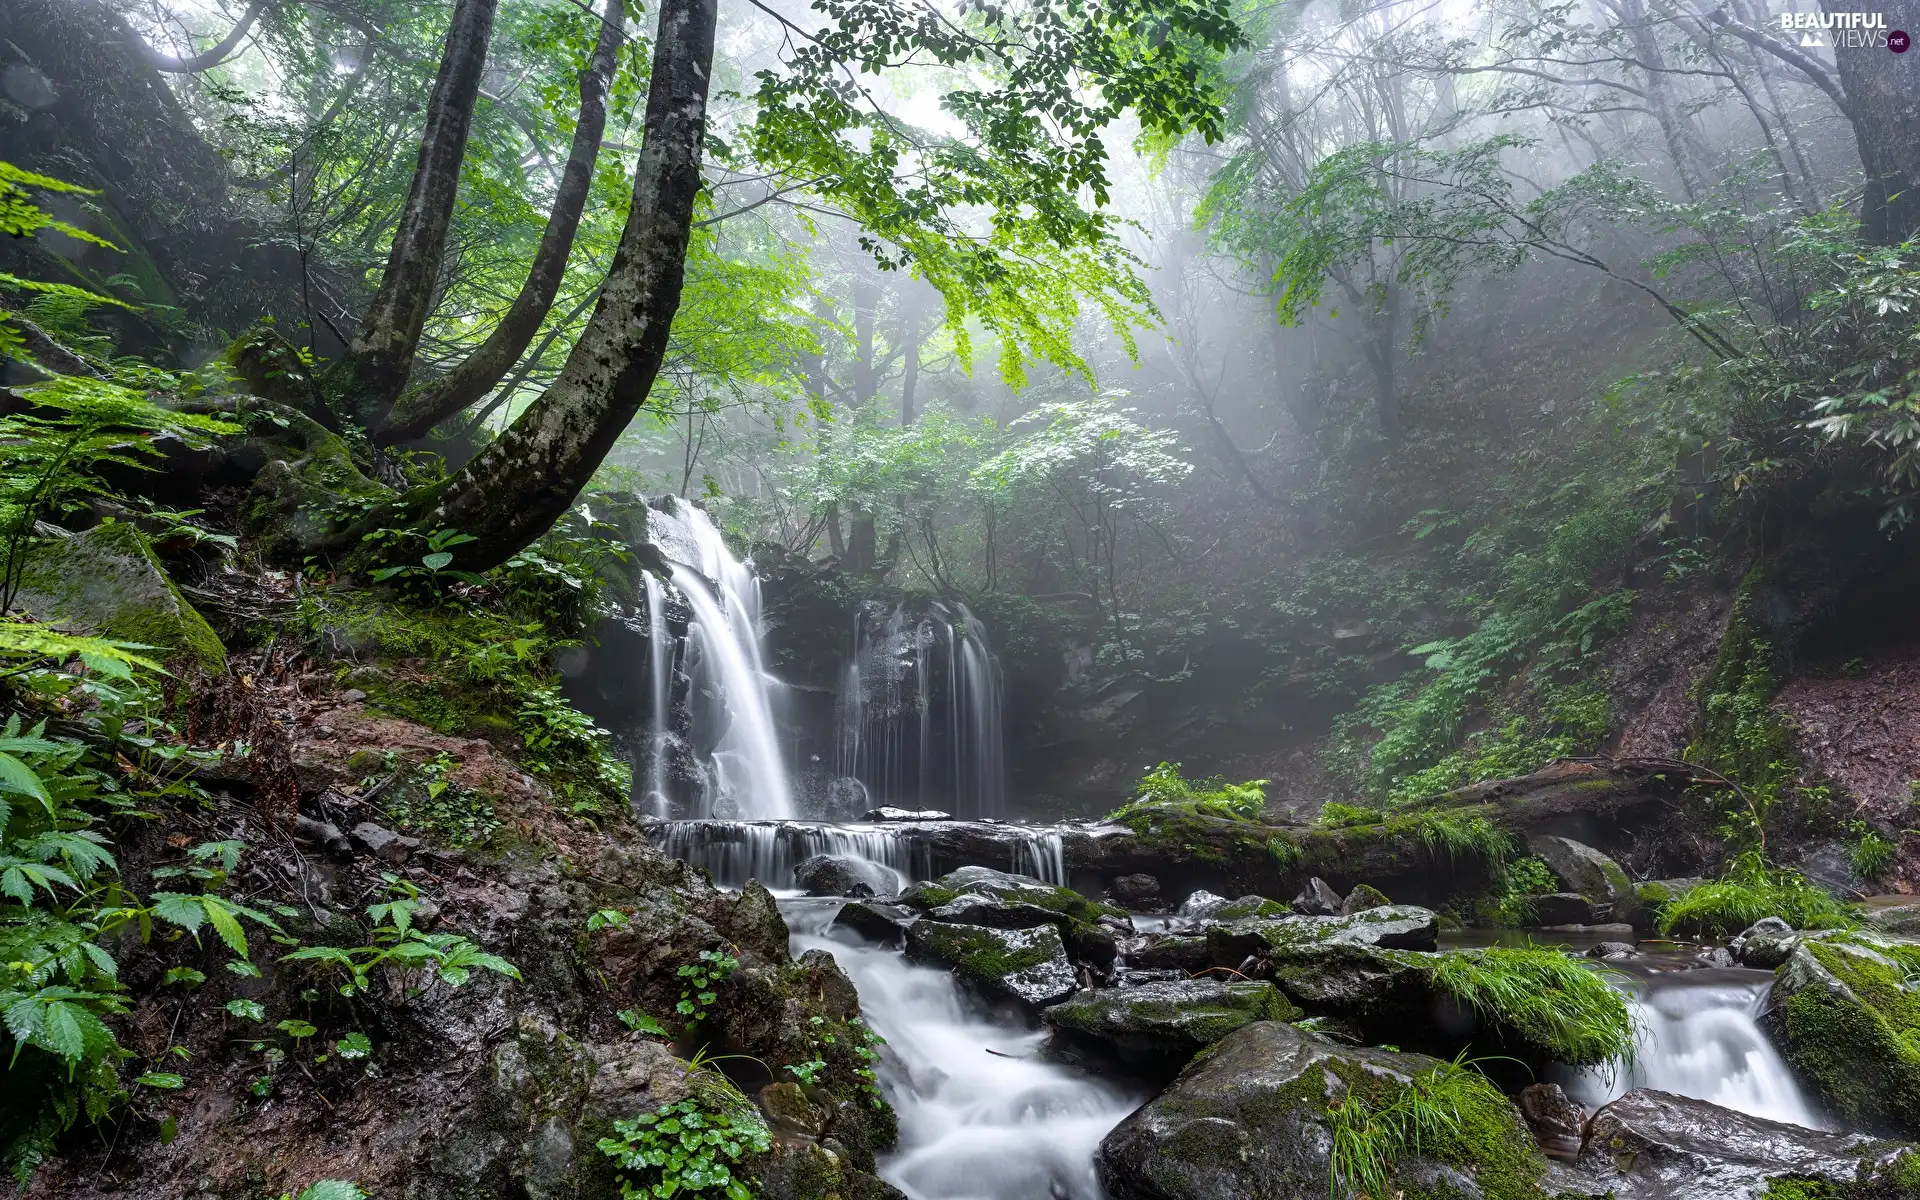 mossy, Stones, VEGETATION, Fog, viewes, River, waterfall, trees